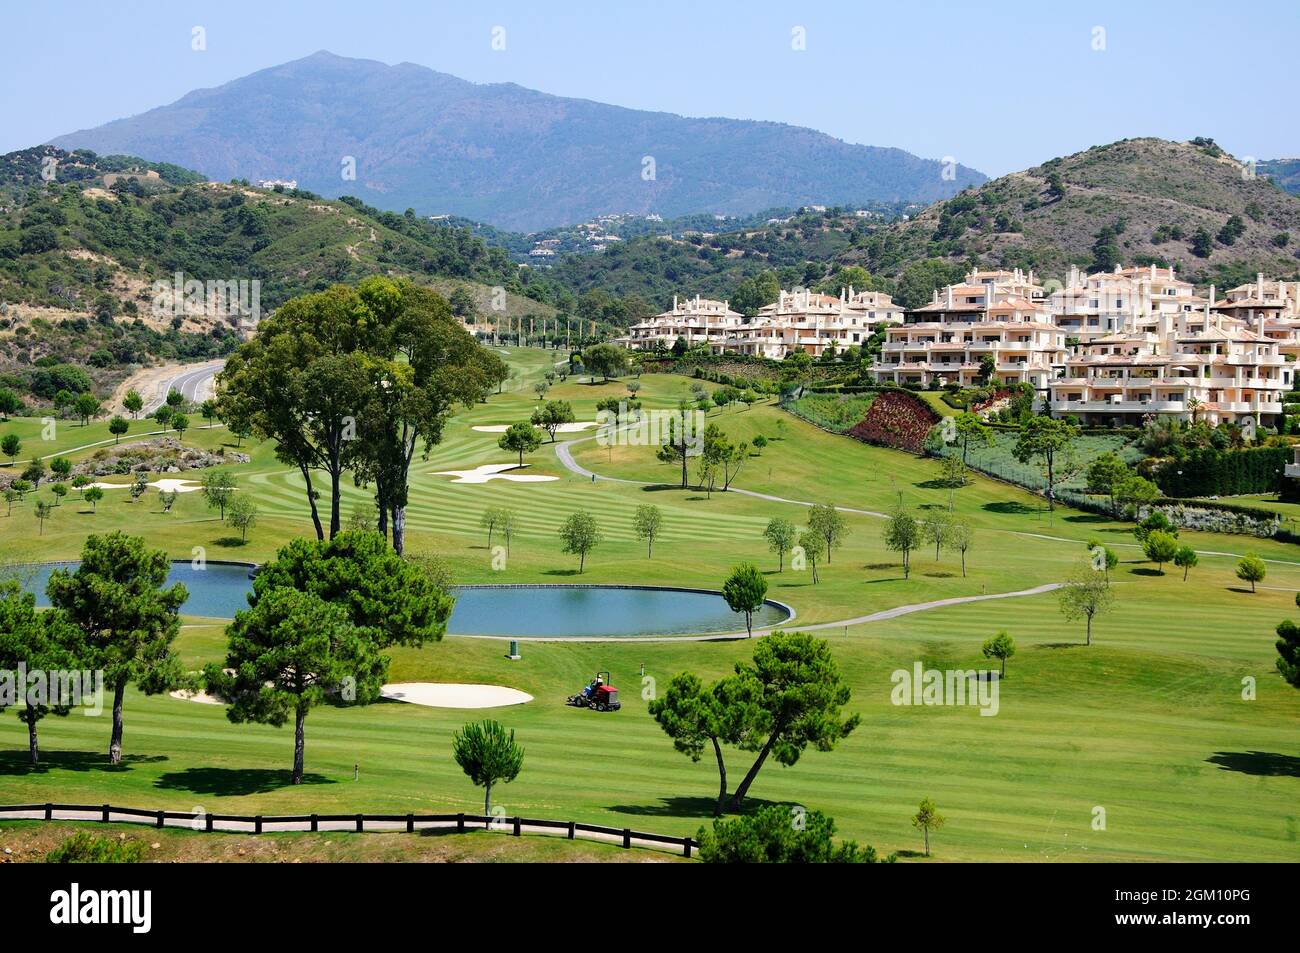 View across El Higueral Golf Course with apartments and mountains to the rear, Benahavis, Spain. Stock Photo